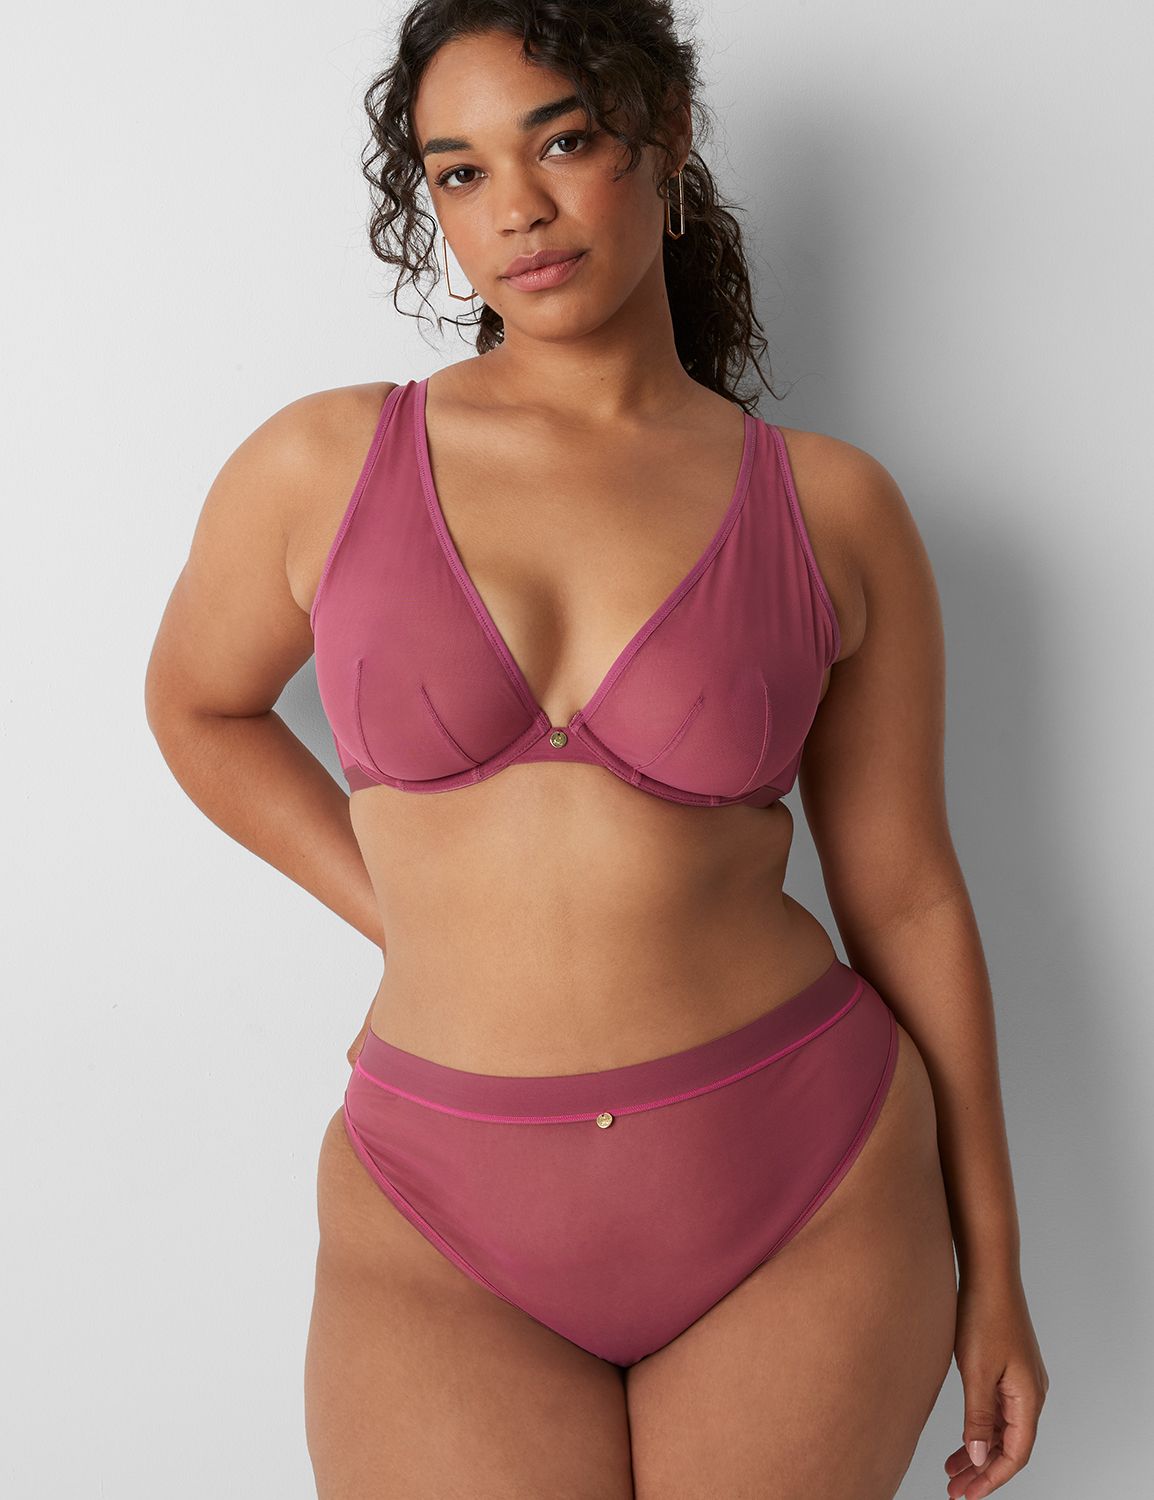 Size 50C Plus Size Bodysuits, Bras & More in Exotic Colors